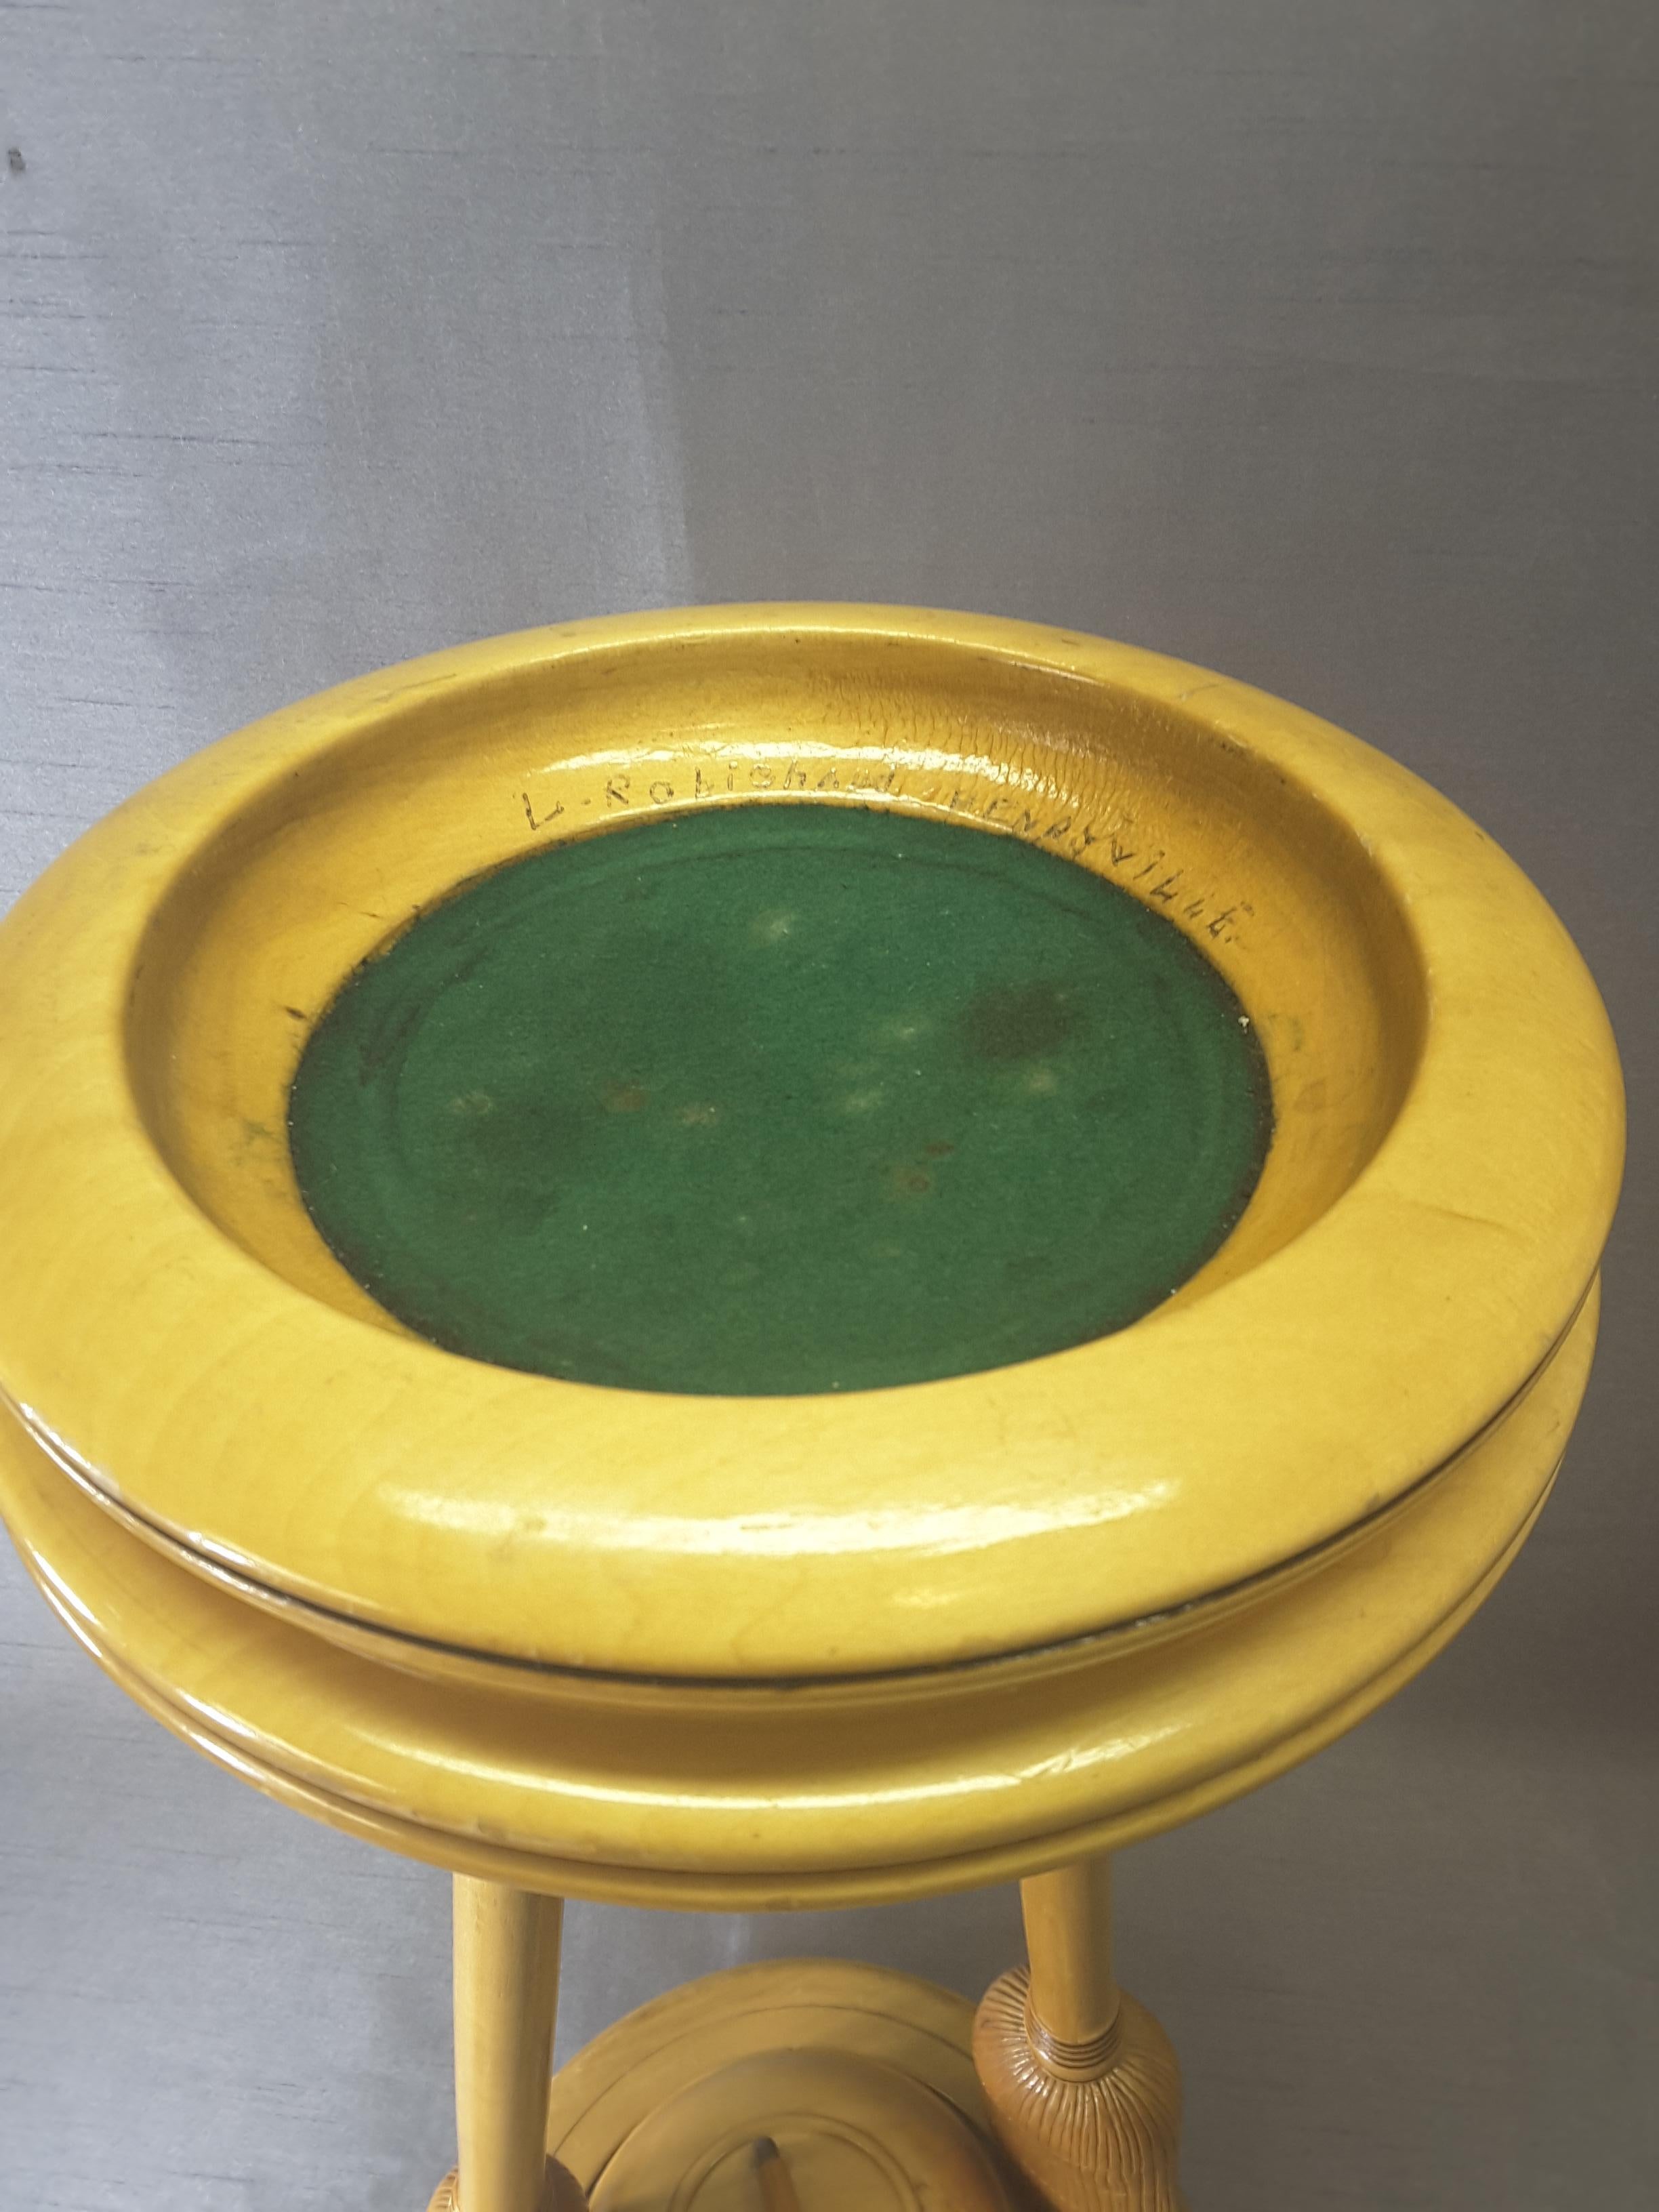 Hand-Crafted Curling Bonspiel Trophy Stand-Up Ashtray Early, 1960s For Sale